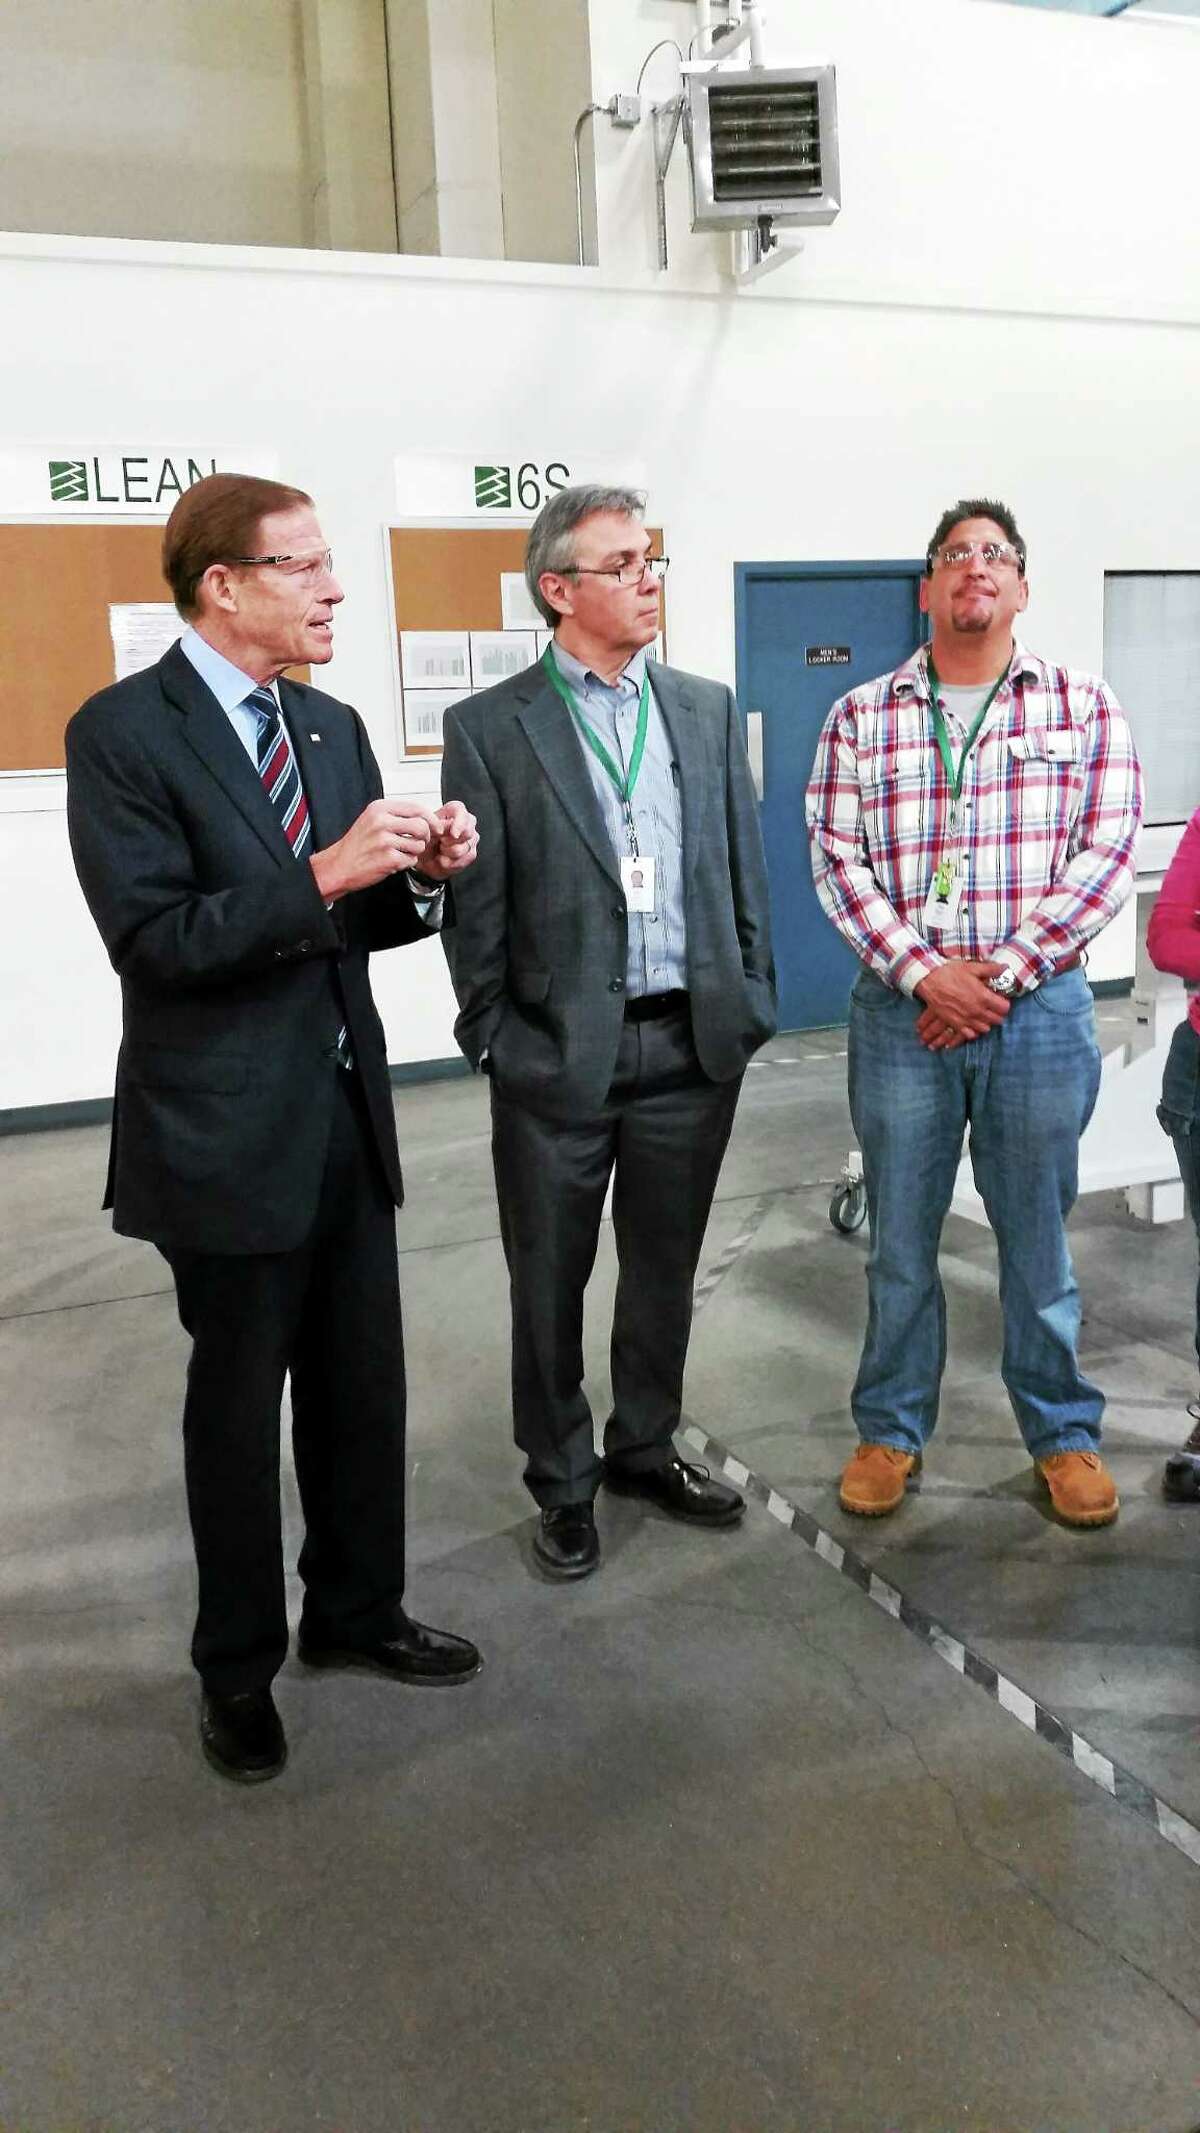 U.S. Sen. Richard Blumenthal thanks FuelCell Energy employees for their work with environmentally friendly energy sources.